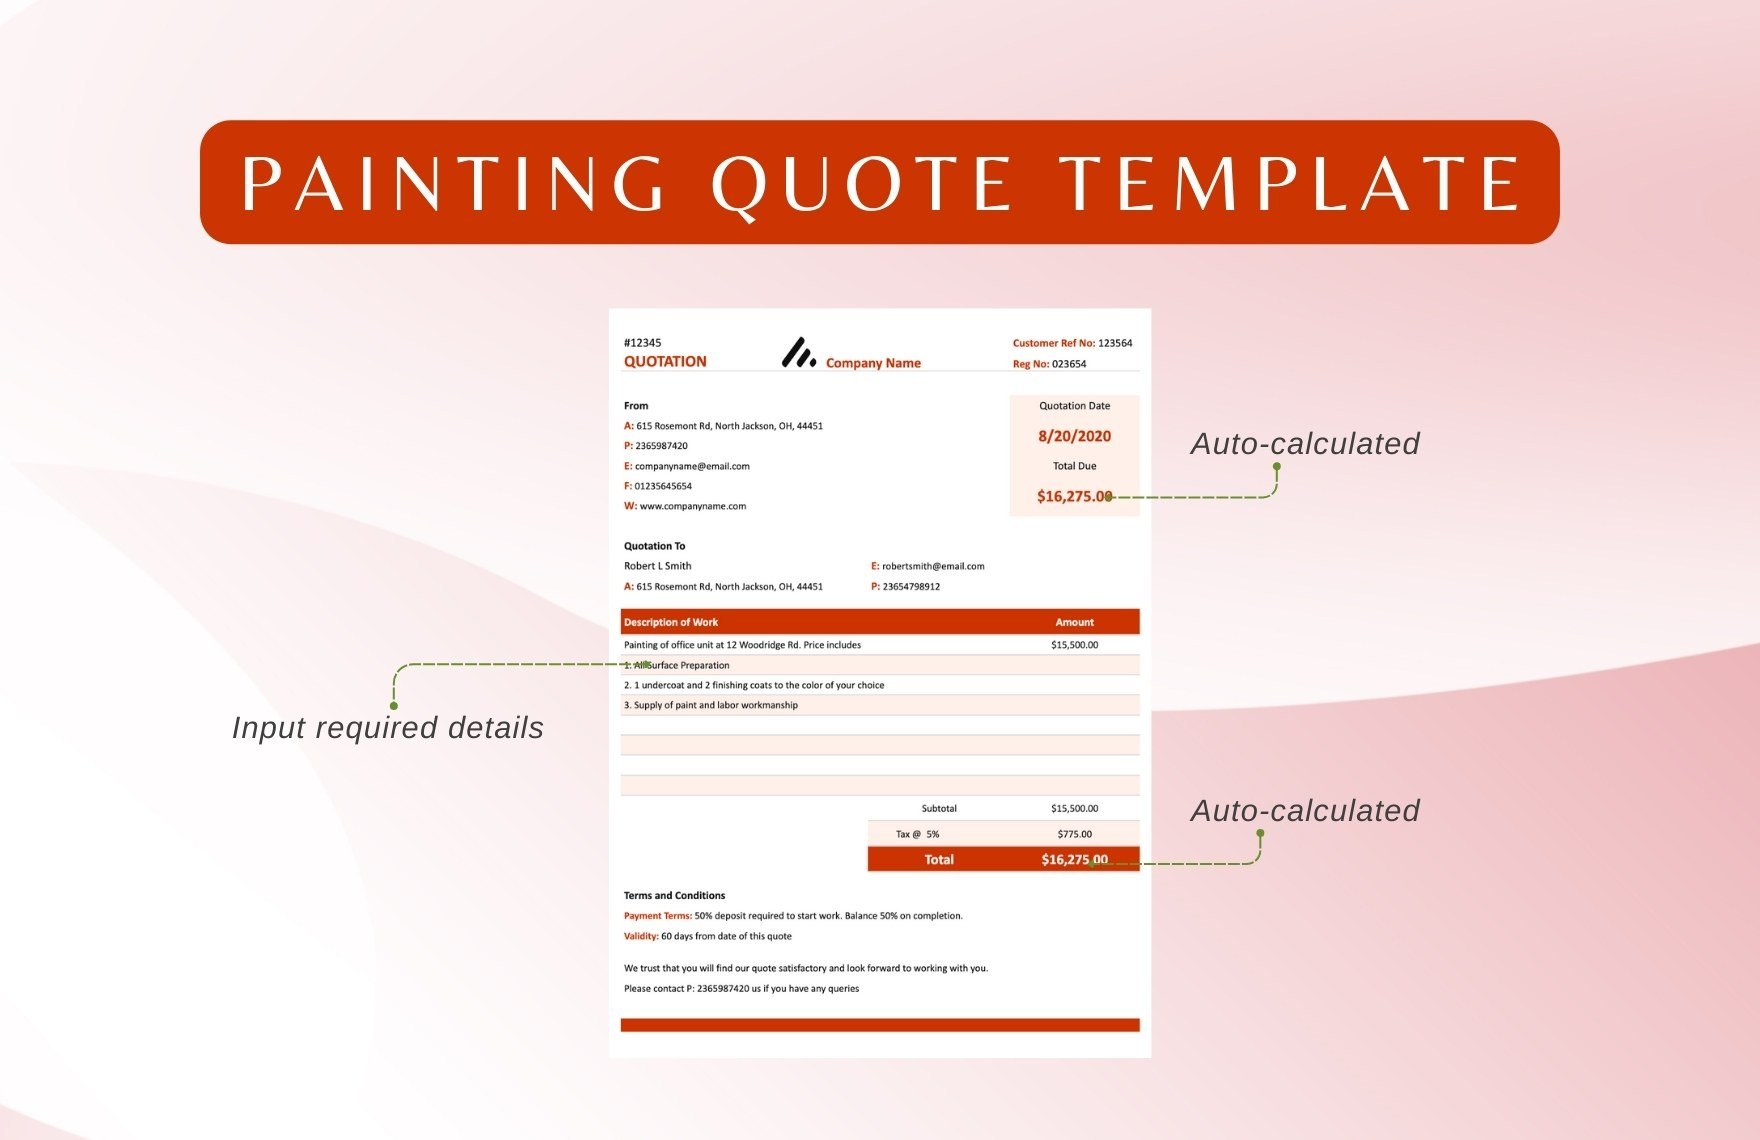 Painting Quote Template